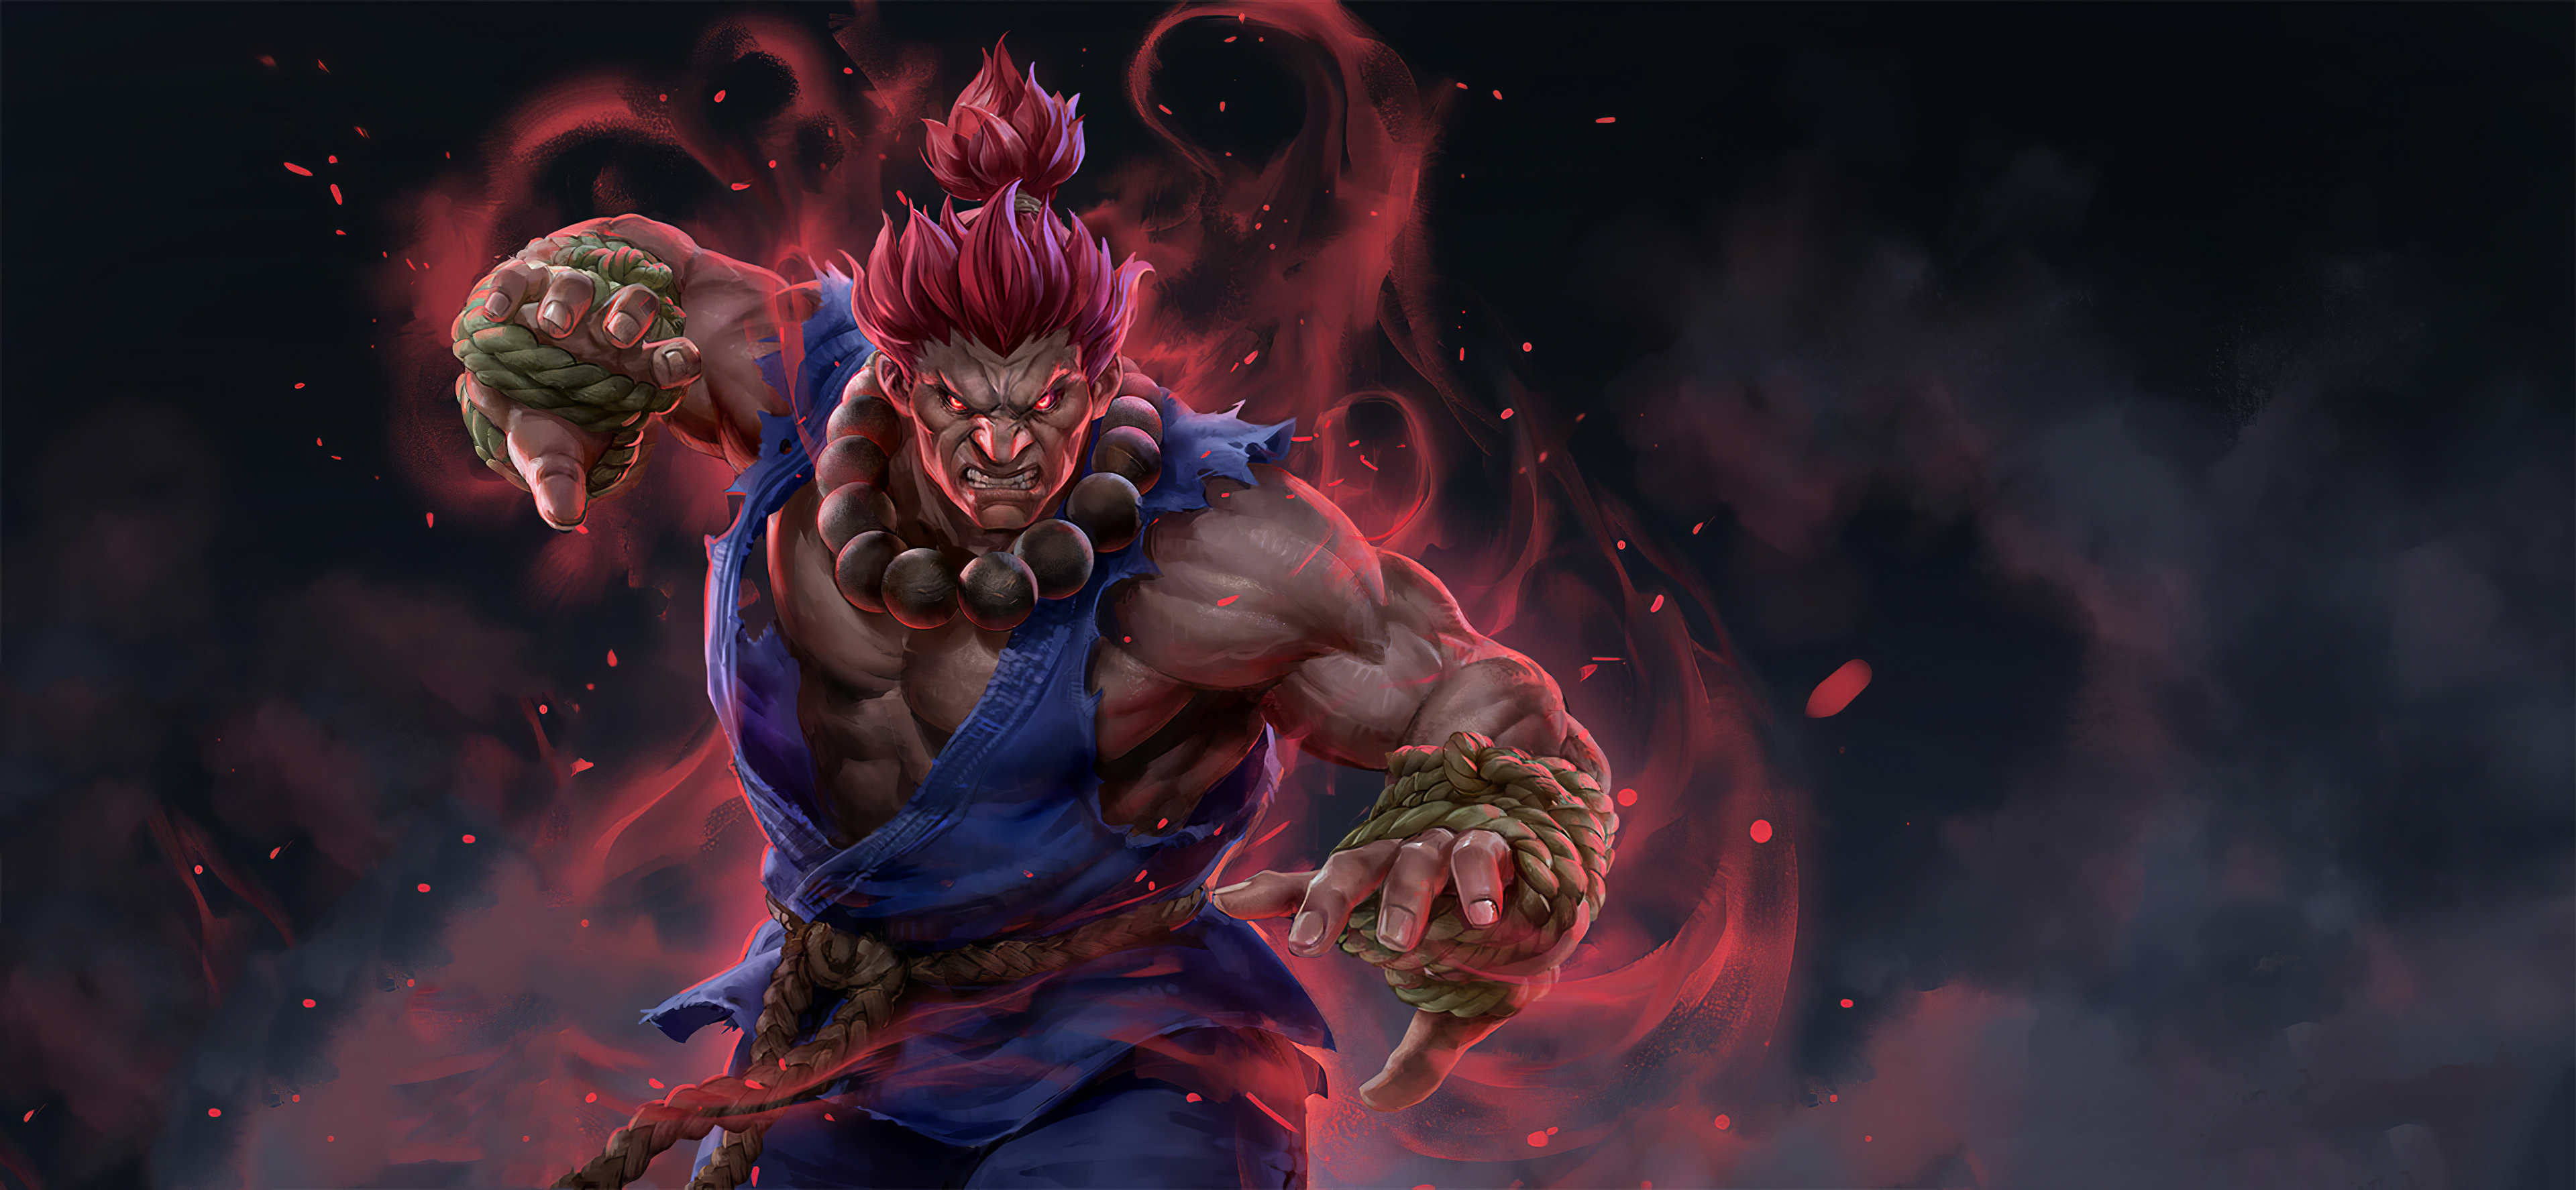 1920x1200 Akuma Artwork Street Fighter 1200p Wallpaper Hd Games 4k Wallpapers Images Photos And Background